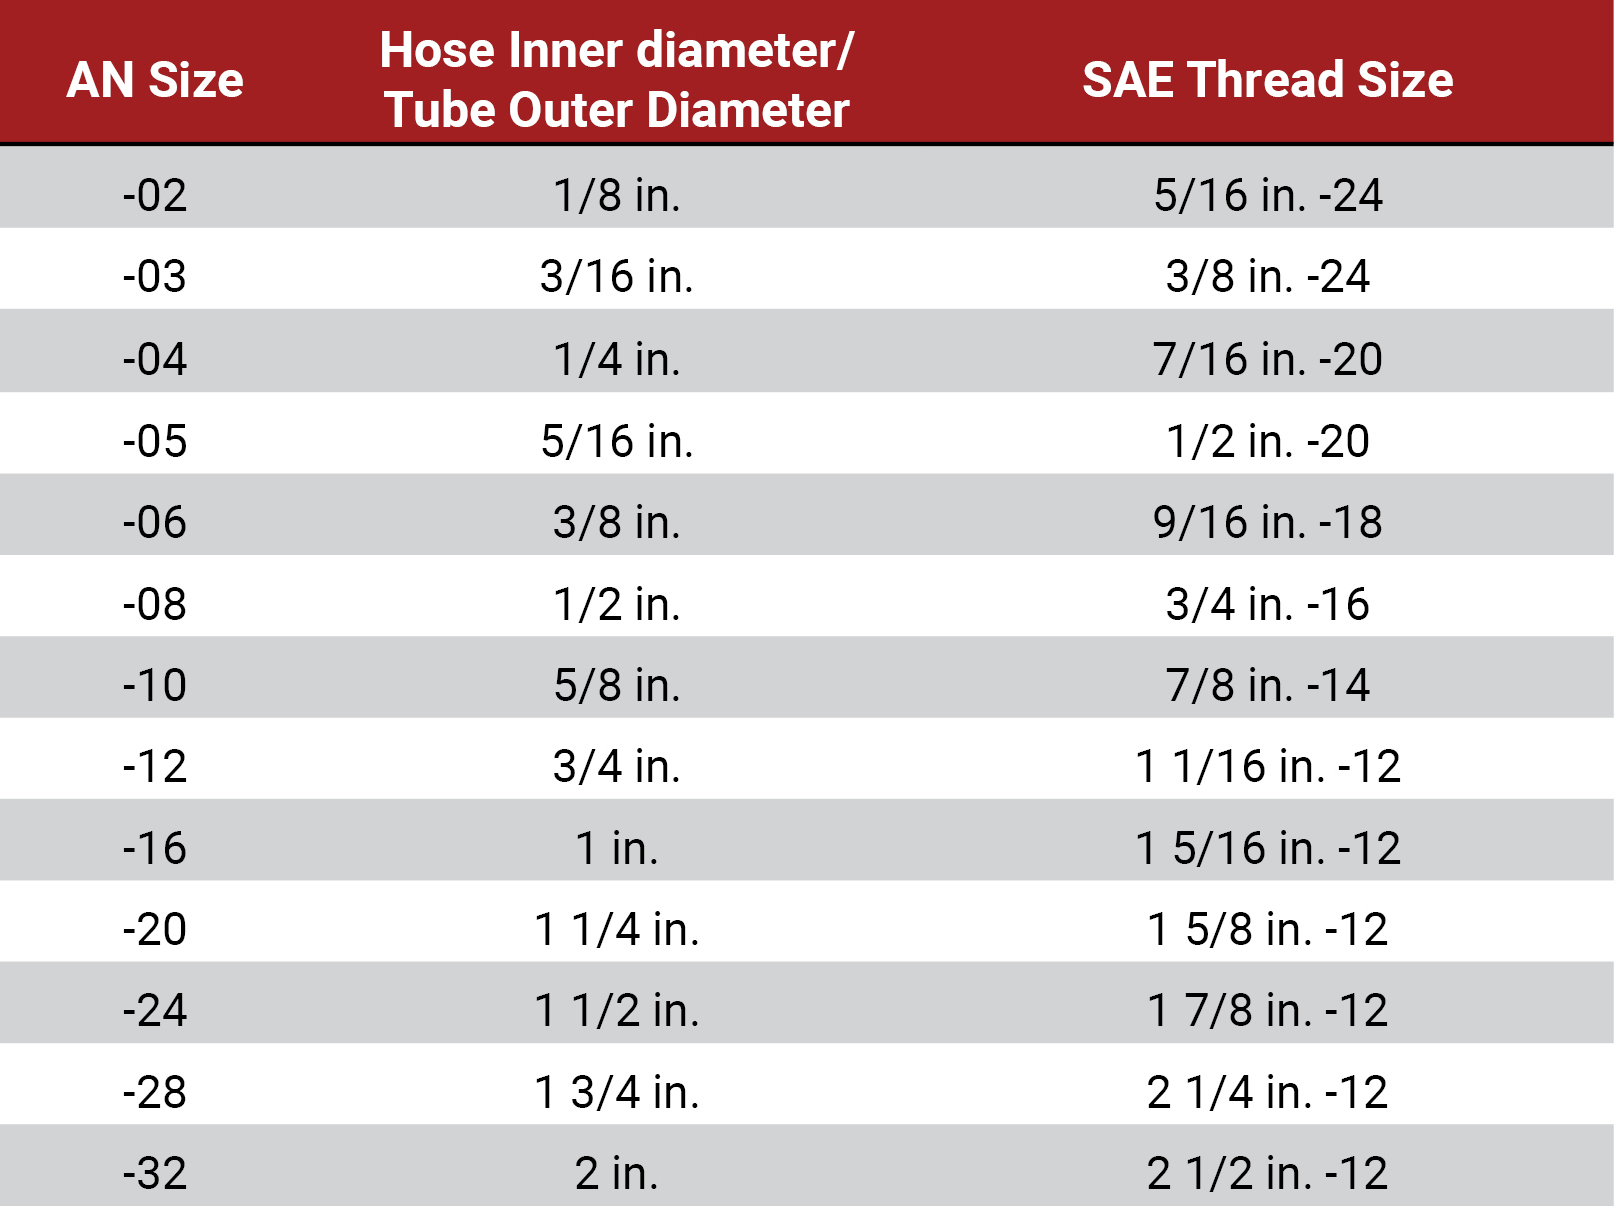 Table showing AN Hydraulic Fittings Size, Hose Inner diameter divided by tube outer diameter reaction, SAE Thread Size